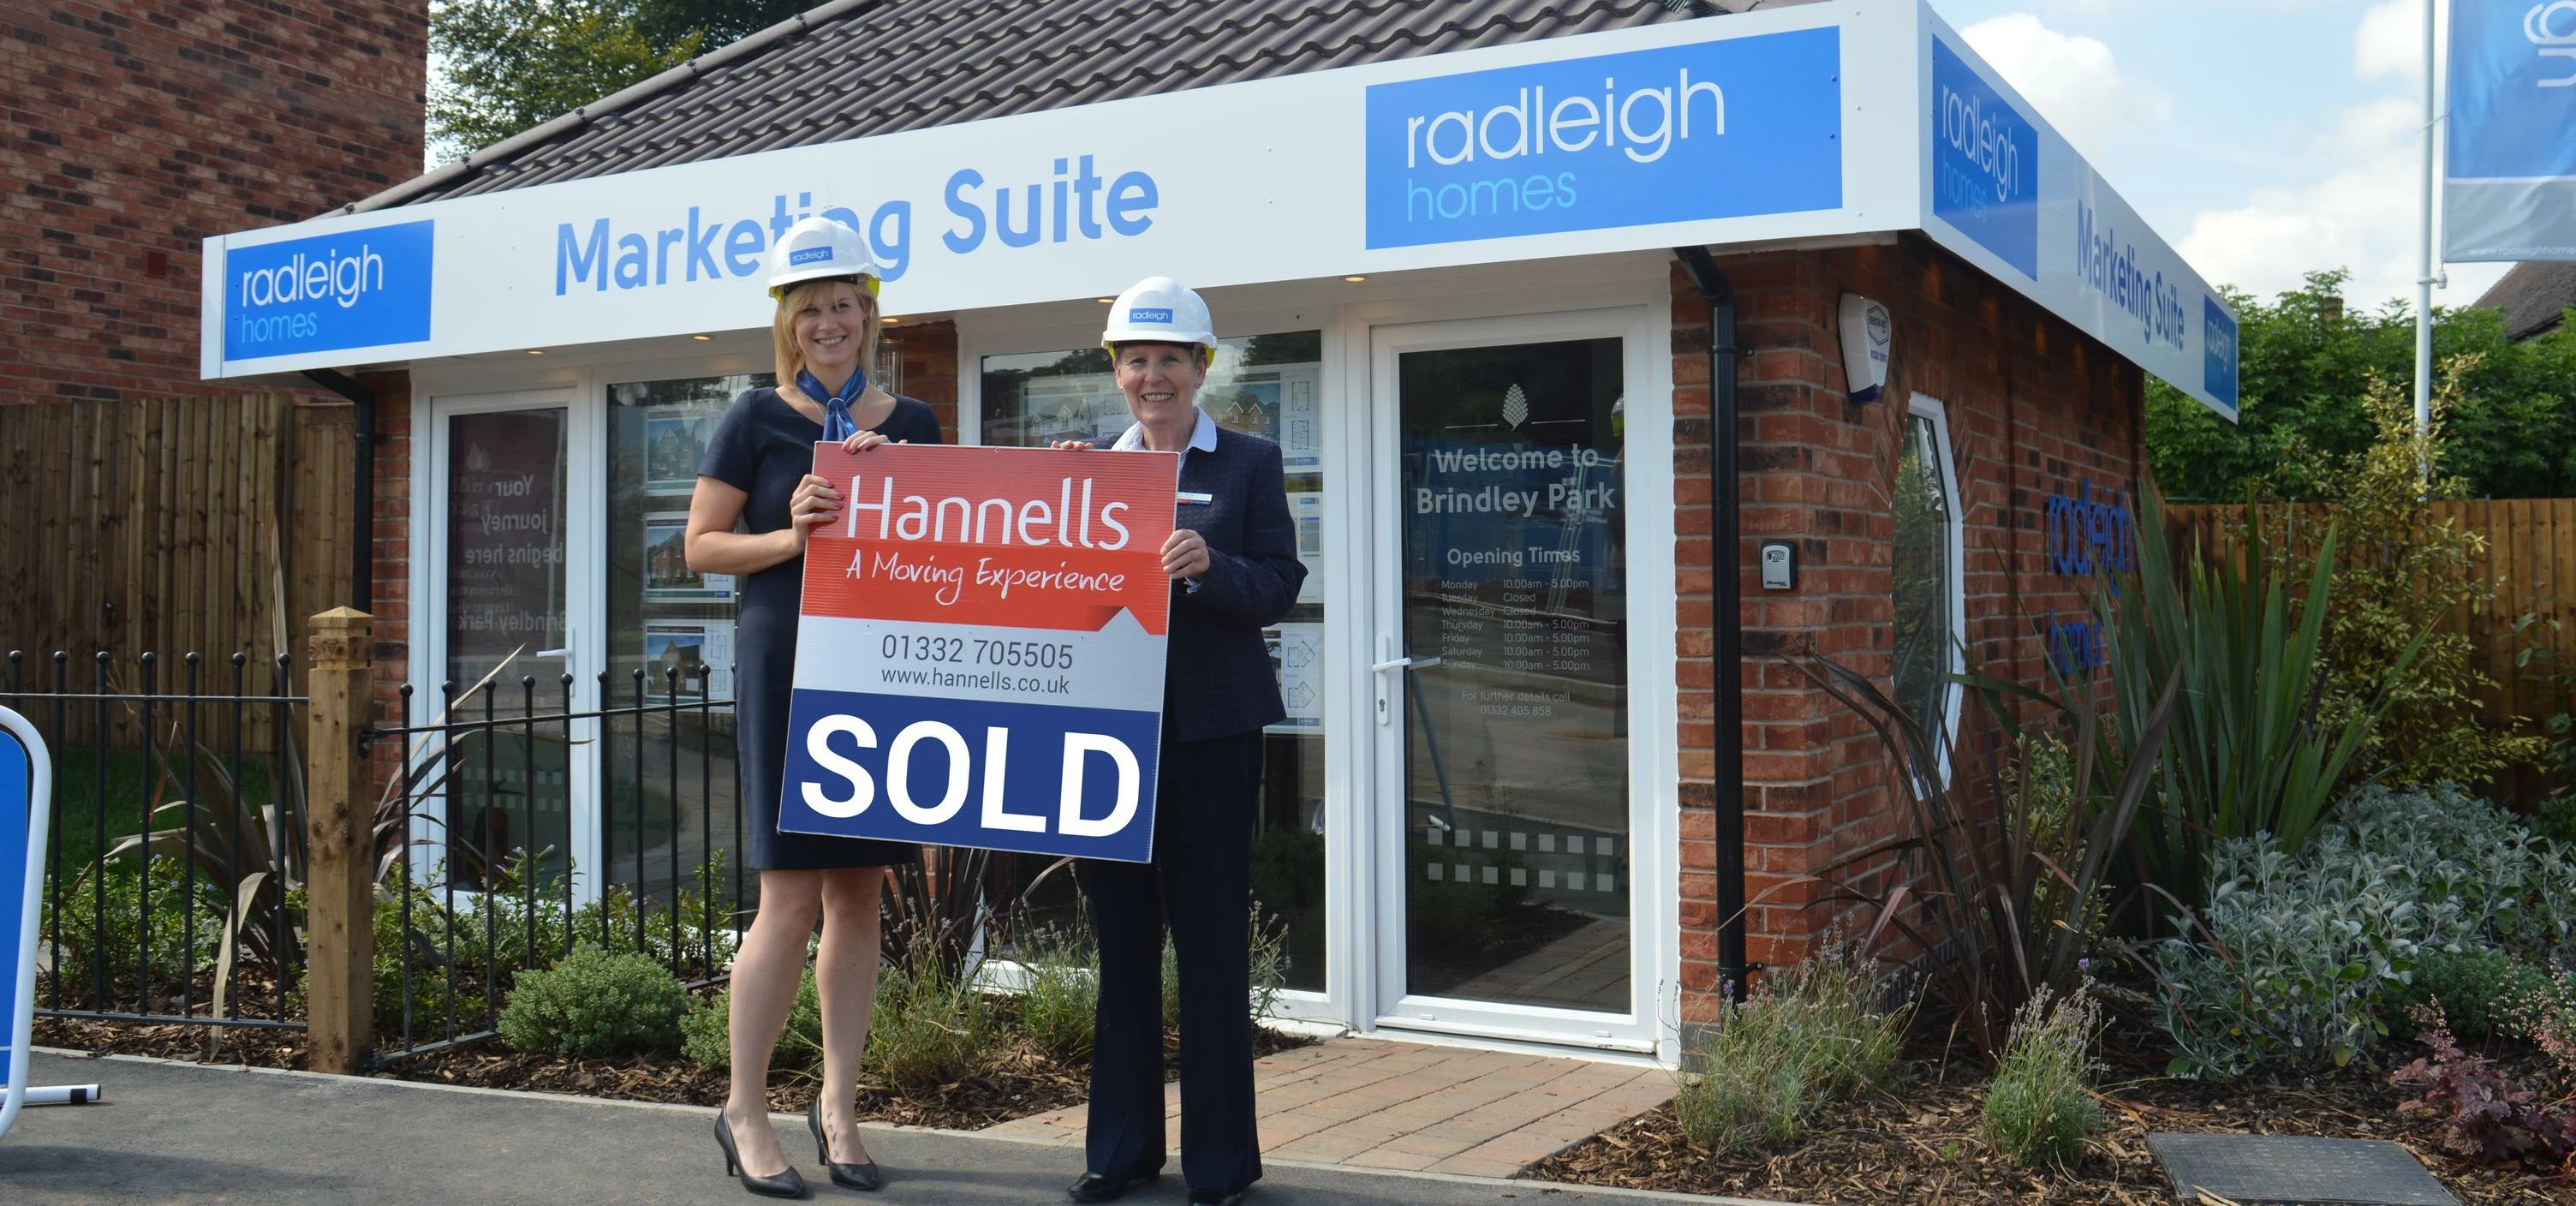 Radleigh Homes' partnership with Hannells